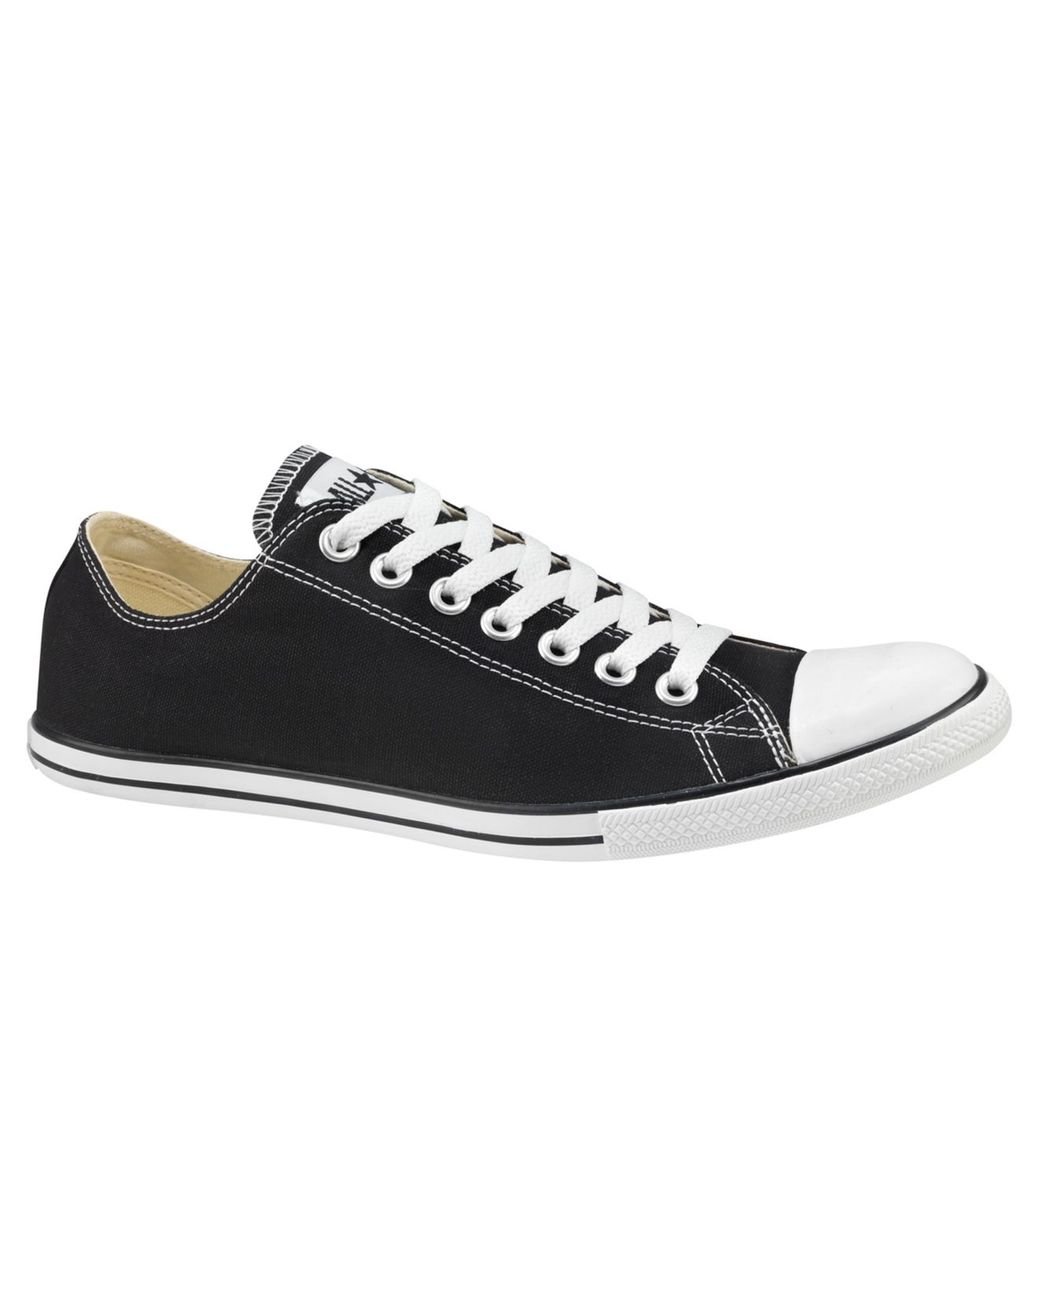 Converse Chuck Taylor Sneakers in Black | Lyst